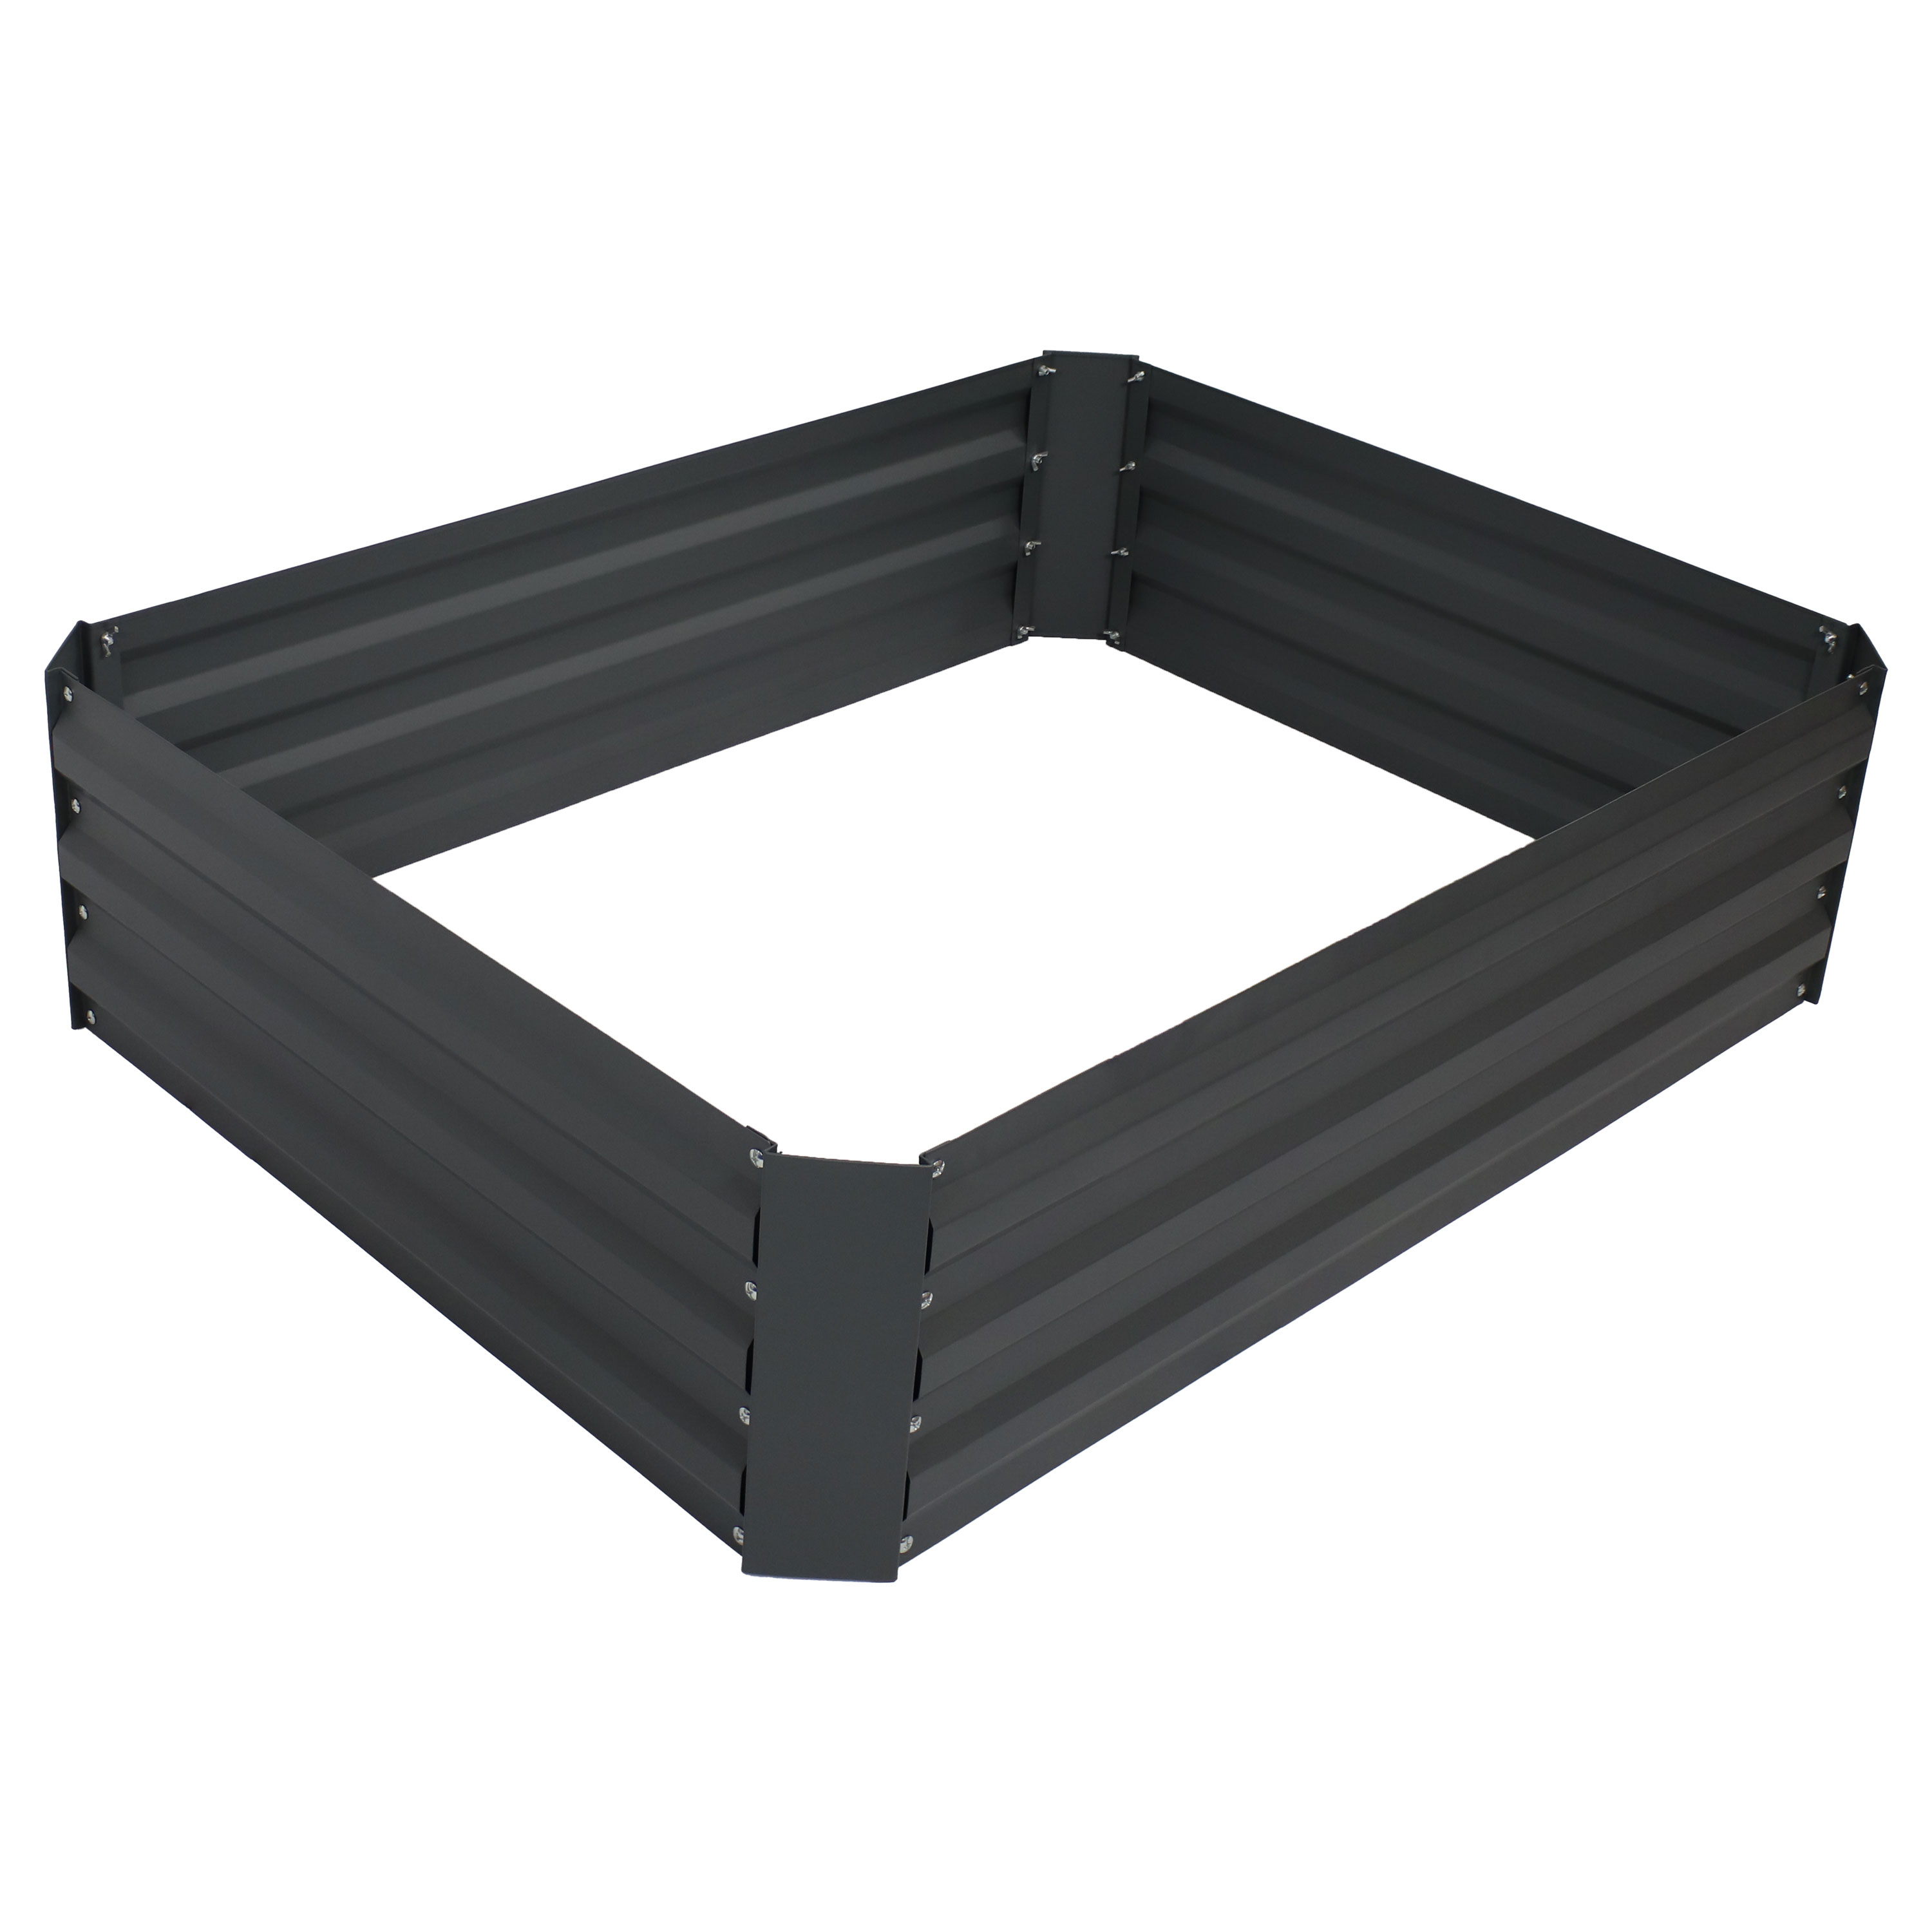 Rectangle Steel Raised Planter Bed - 4 x 3 ft - Gray